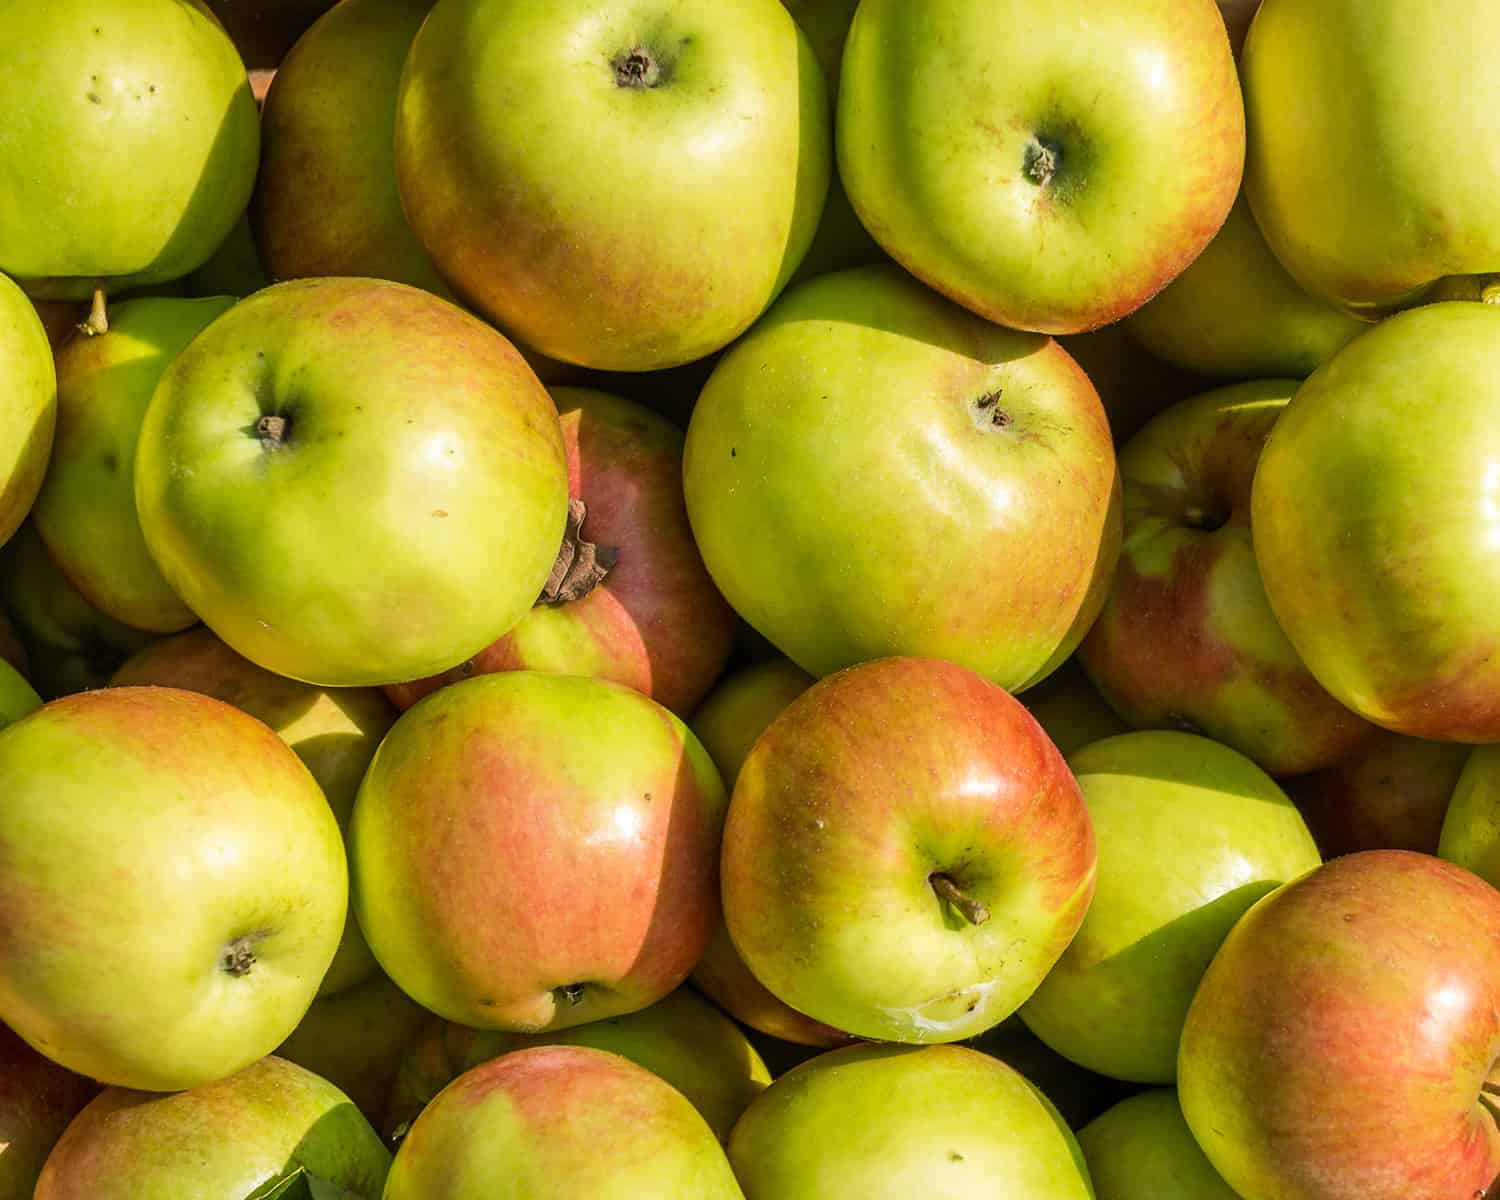 A photo is full to frame with Apples, a seasonal fruit crop available in October.